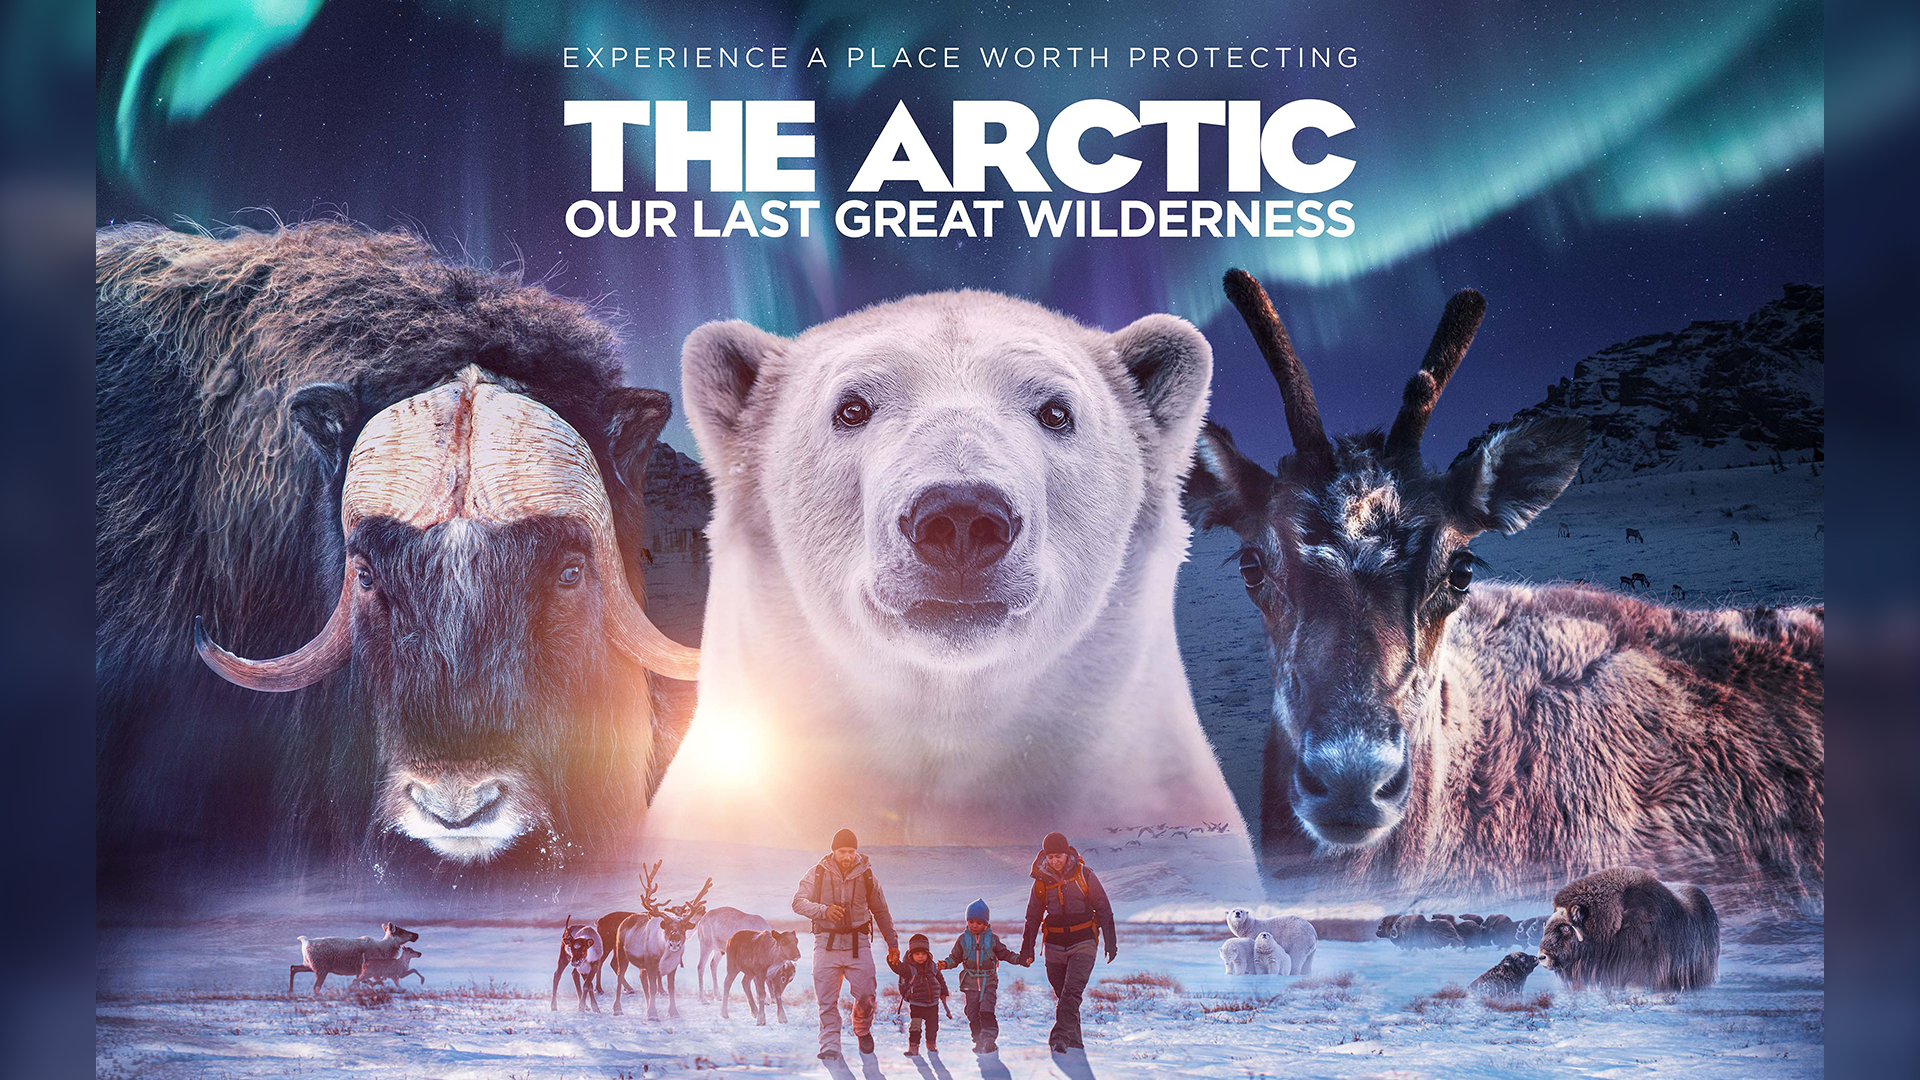 The Arctic documentary poster with animals and people in the foreground.